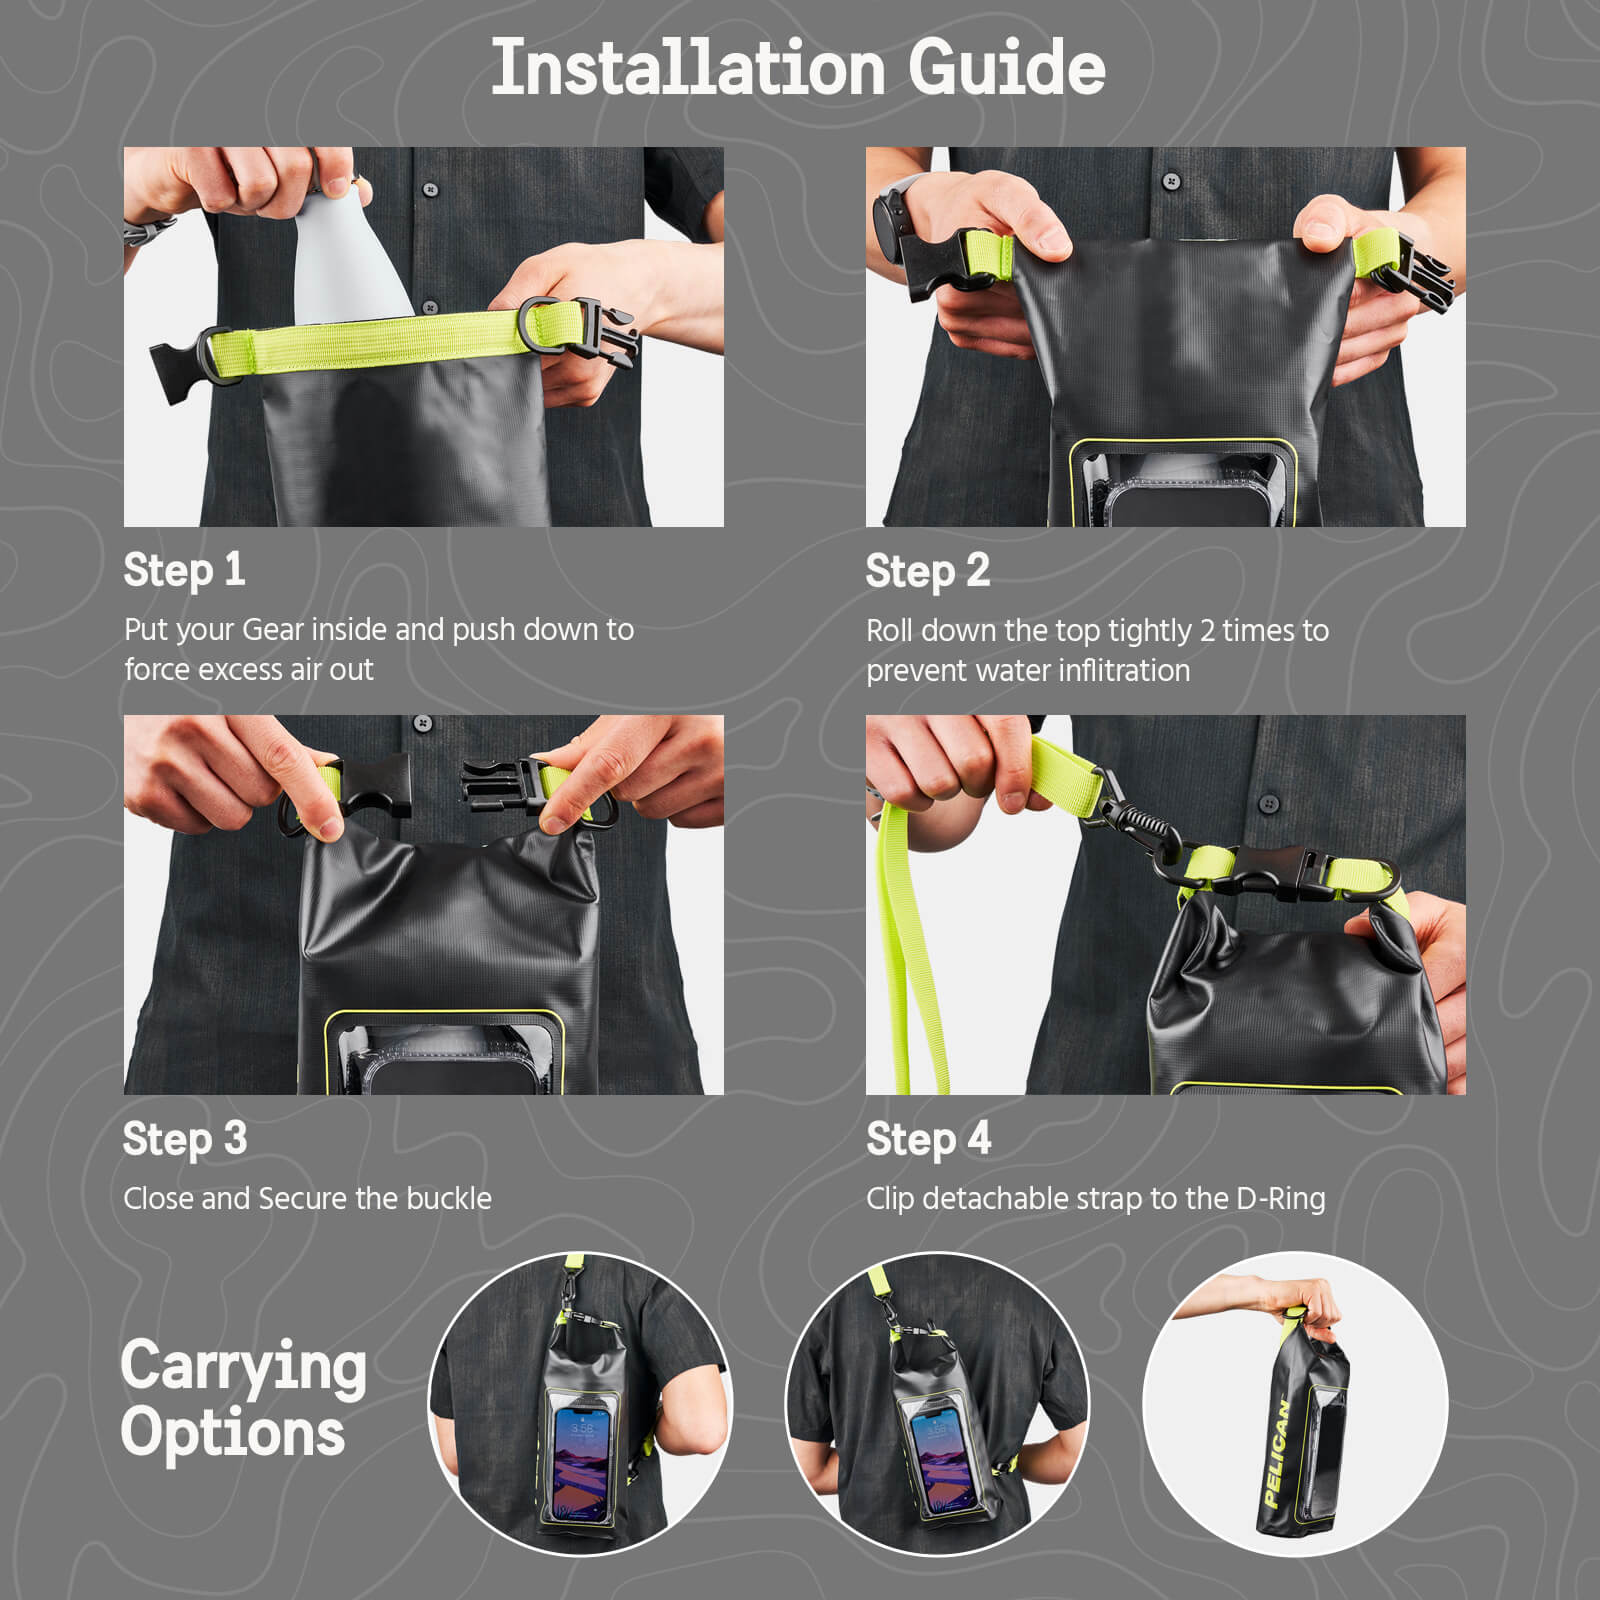 Pelican Marine Water Resistant Dry Bag Installation Guide. Step 1: Put your Gear inside and push down to force excess air out. Step 2: Roll down the top tightly 2 times to prevent water infiltration. Step 3: Close and Secure the buckle. Step 4: Clip detachable strap to the D-Ring. Color:: Black/Hi-Vis Yellow